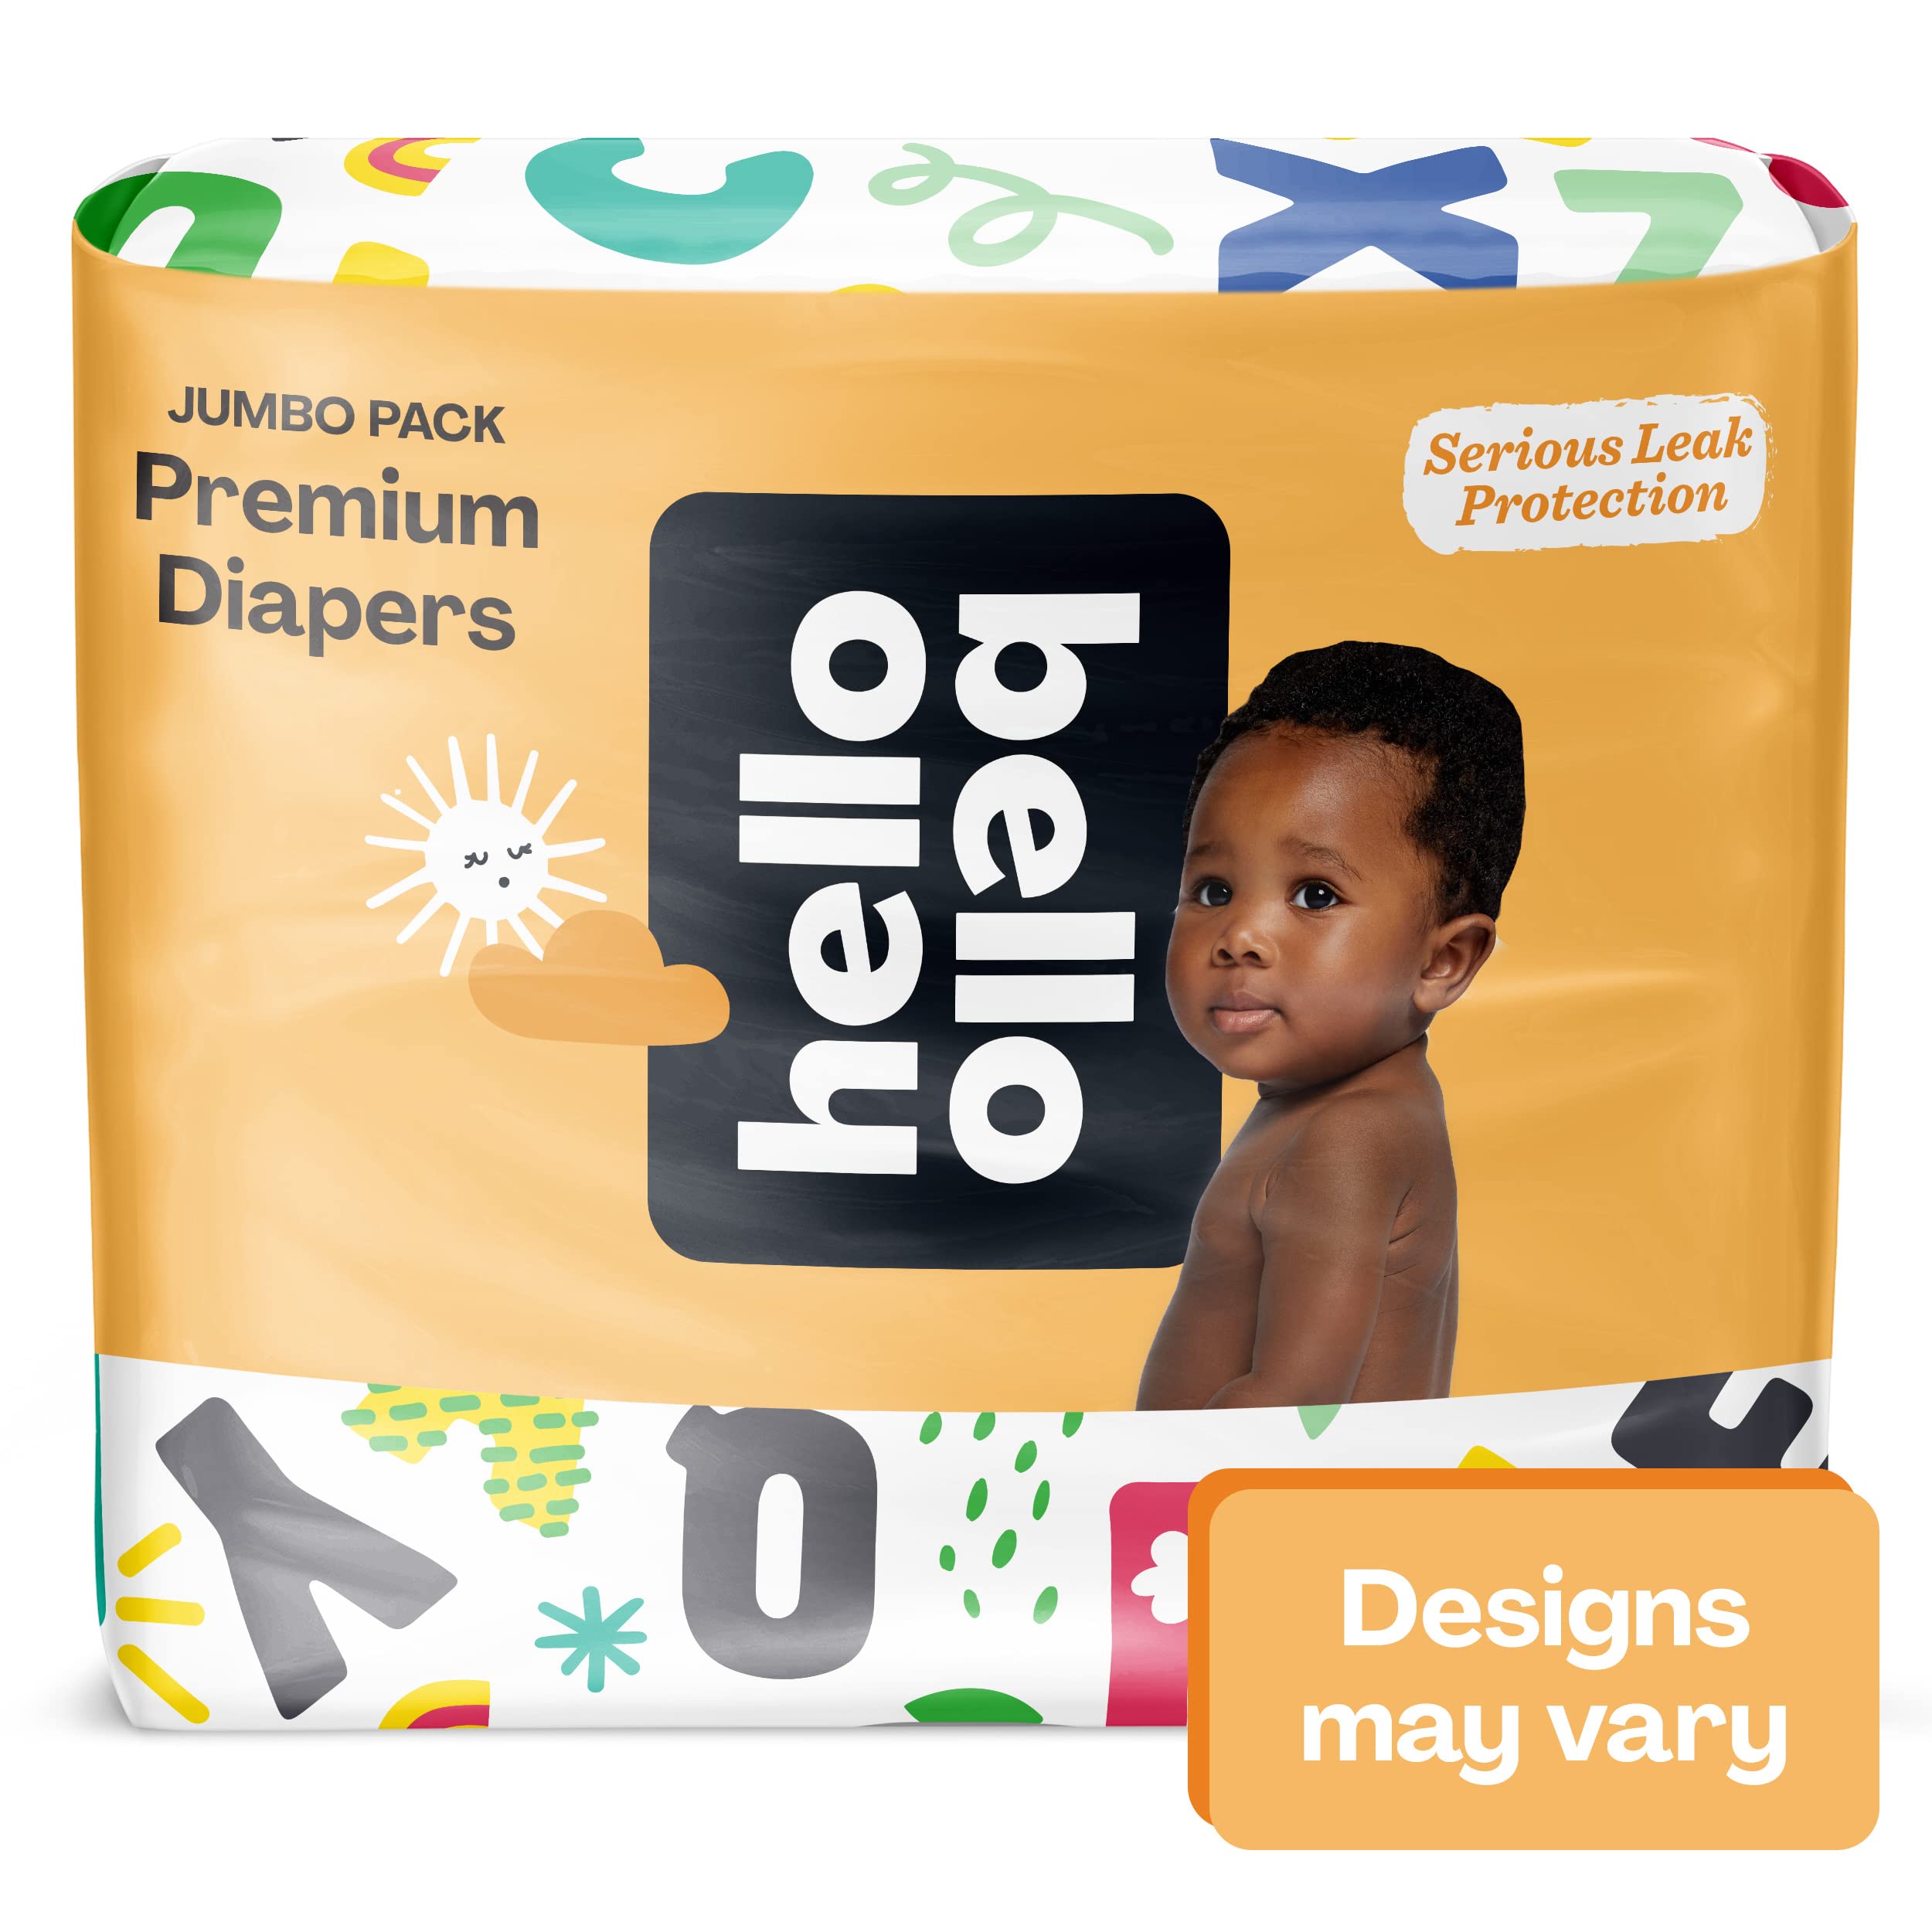 Hello Bello Premium Baby Diapers Size 1 I 128 Count of Disposable, Extra-Absorbent, Hypoallergenic, and Eco-Friendly Baby Diapers with Snug and Comfort Fit I Surprise Girl Patterns